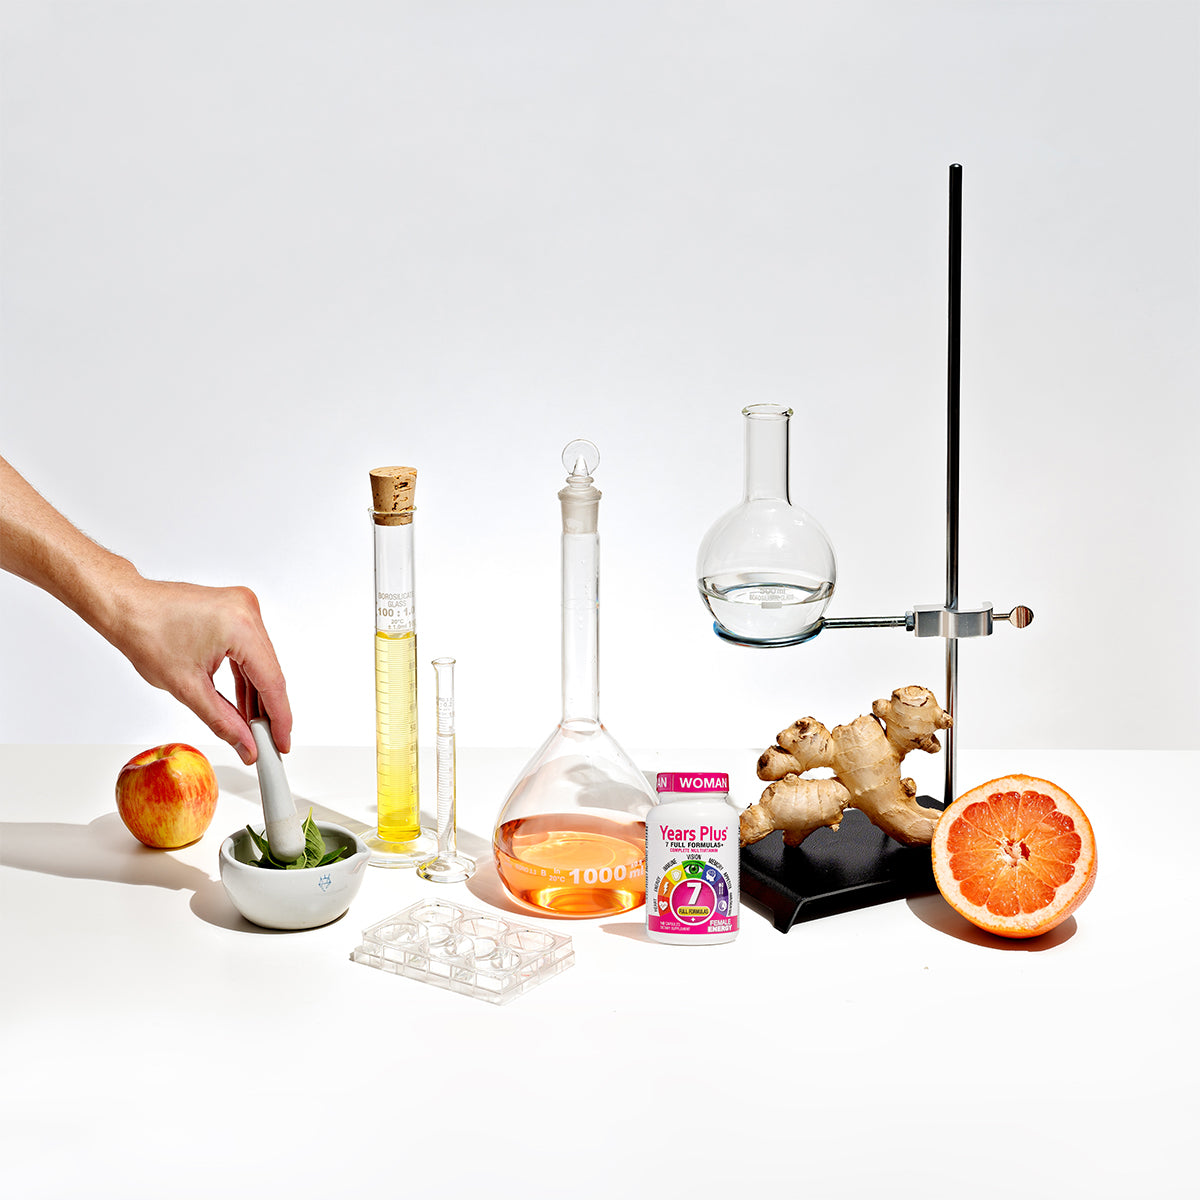 Picture of Years Plus Natural Ingredients and manufacturing equipment examples